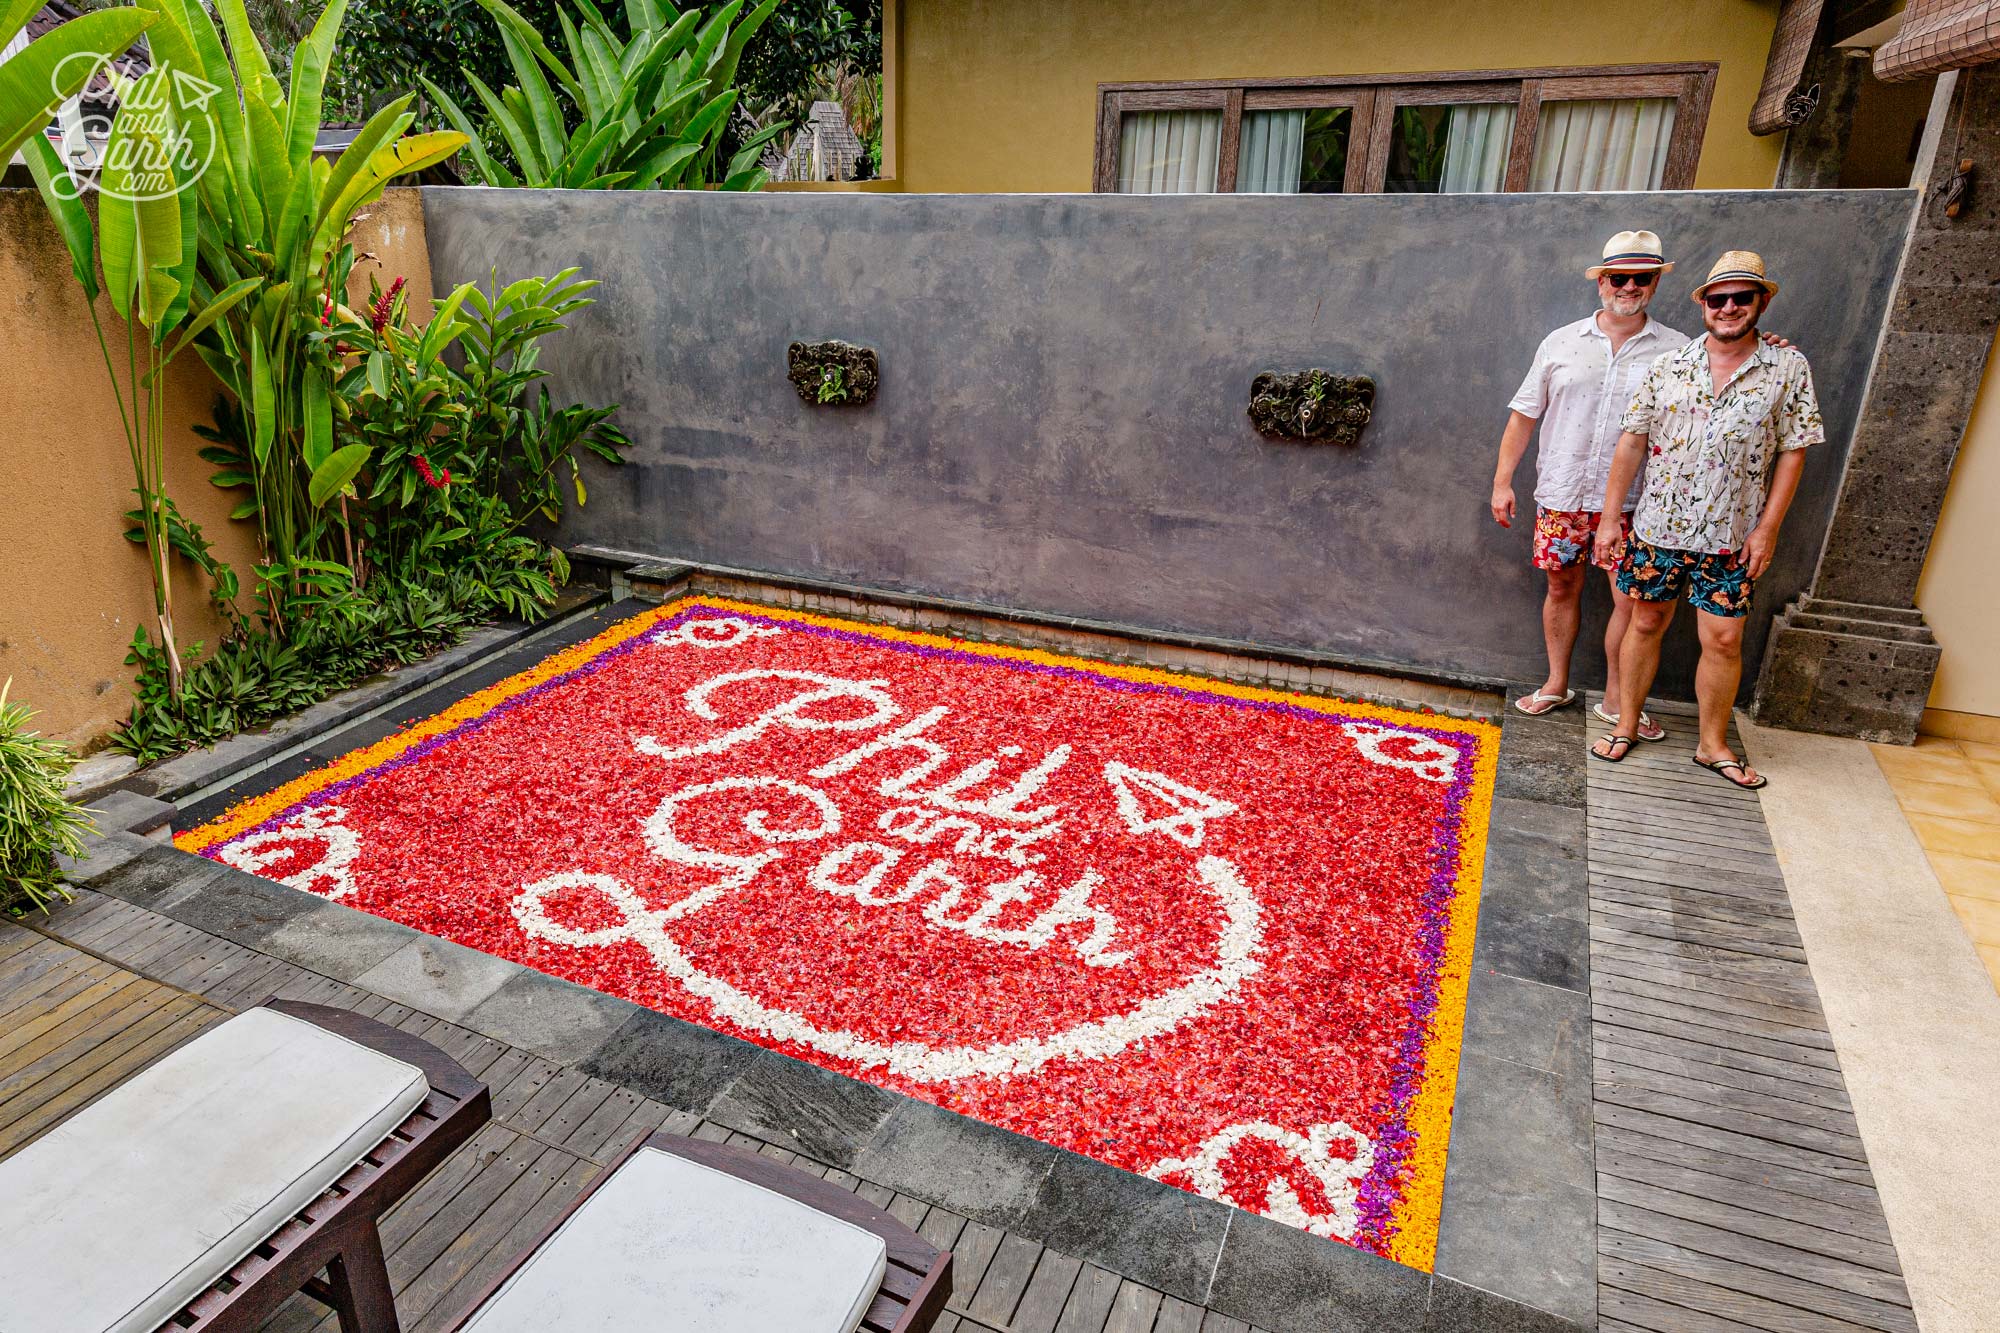 Our amazing flower pool at the Sankara Resort, Ubud perfect for Bali photography